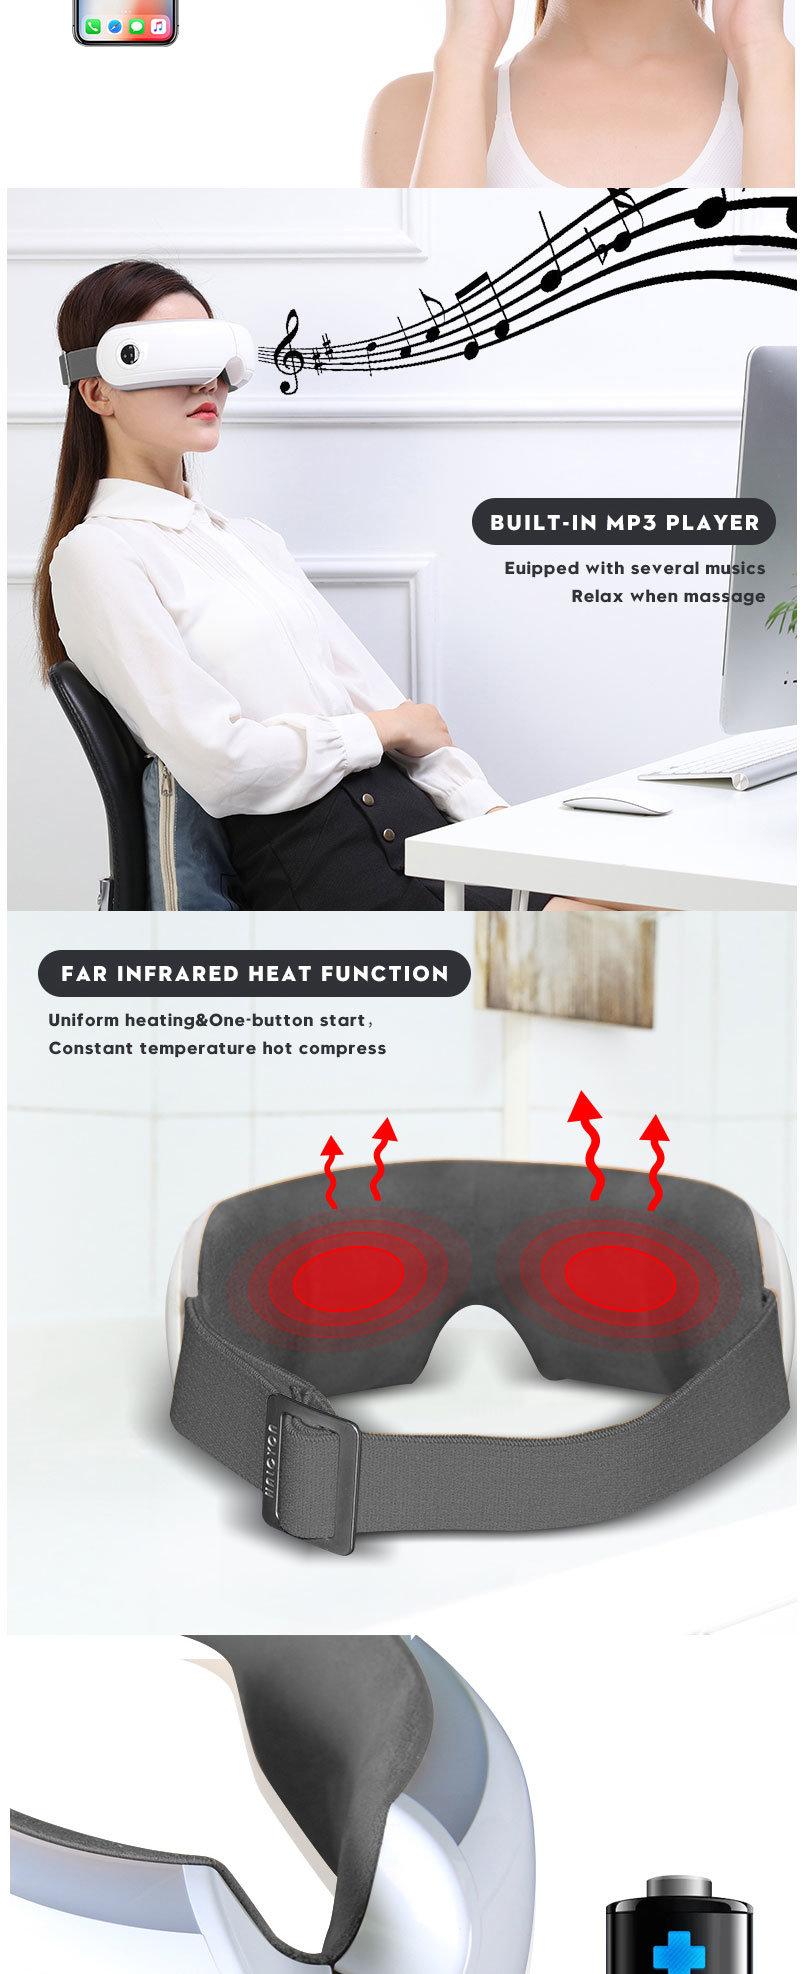 Hot Sales 180 Degree Foldable Electric Anti-Wrinkle Massage Product Eye Pain Care Massager Heating Therapy